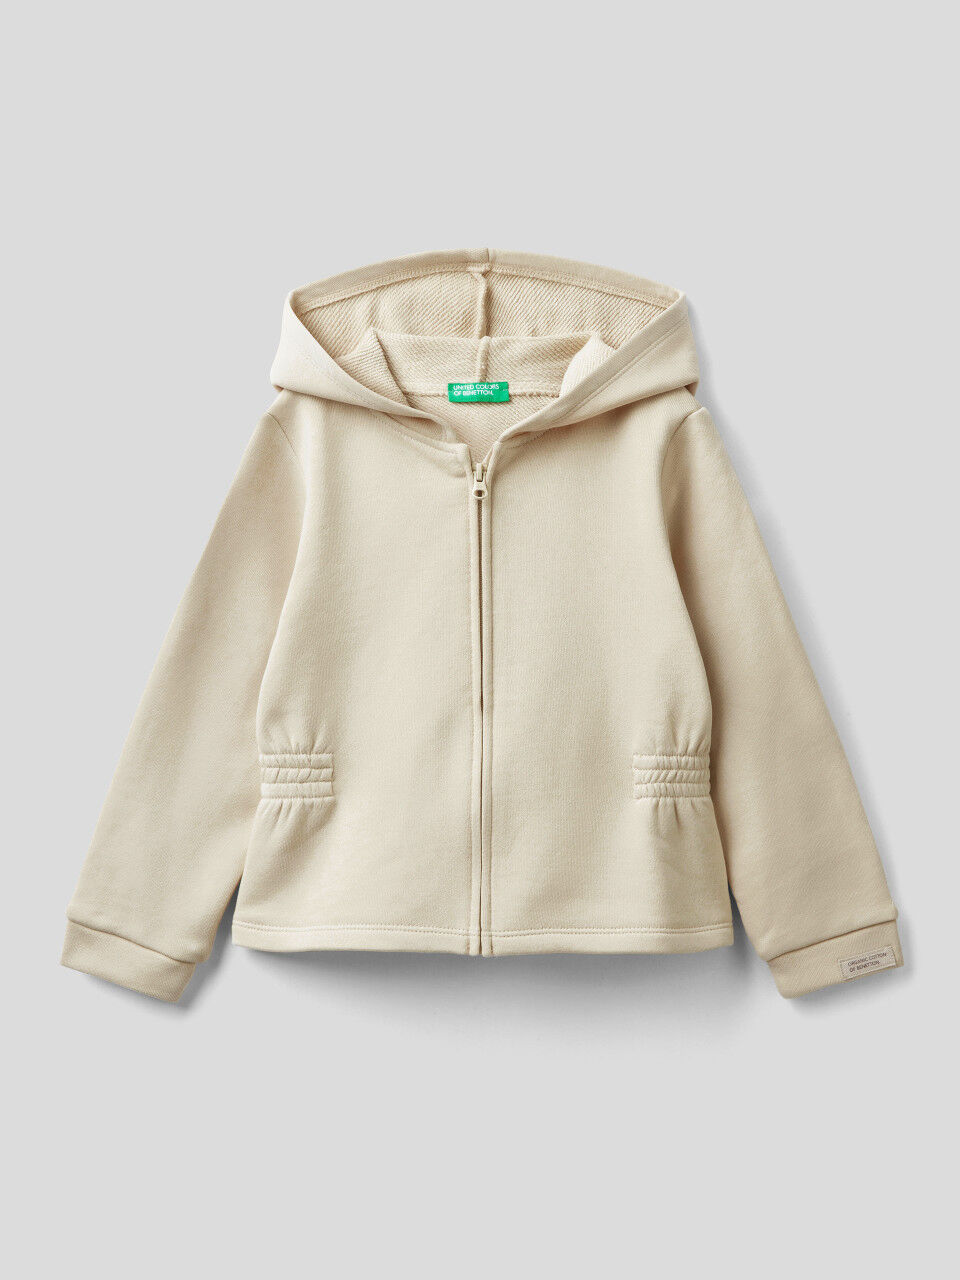 Hoodie in organic cotton